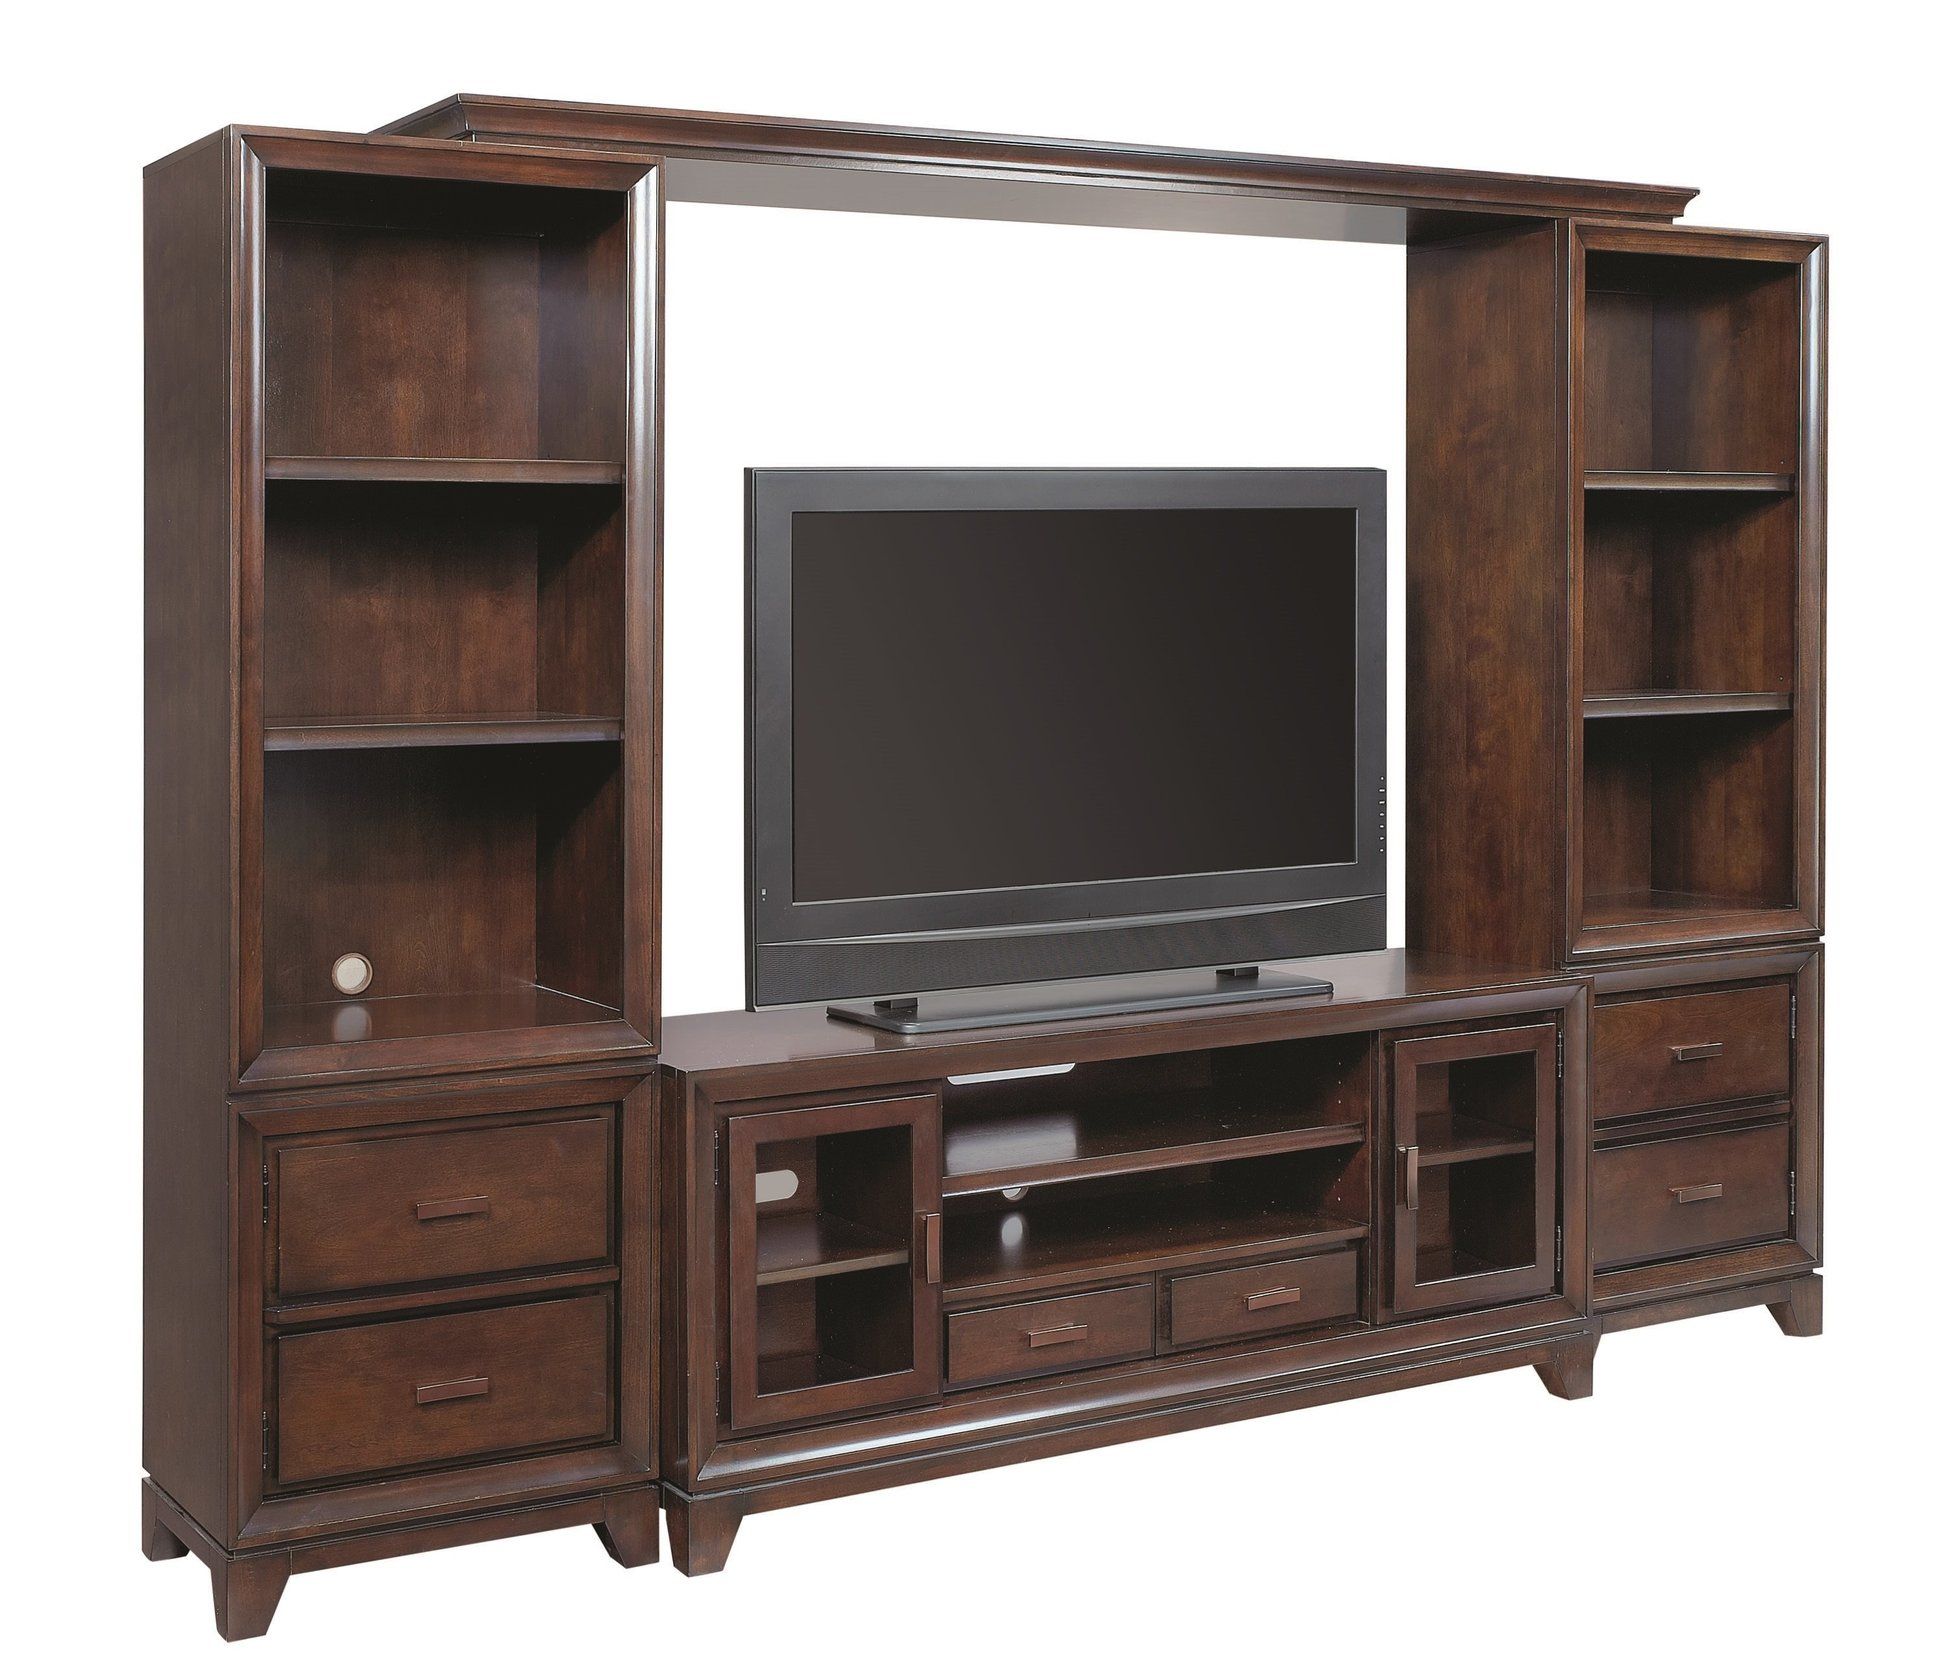 The Viewline 65" Entertainment Wall Console Intended For Casey May Tv Stands For Tvs Up To 70" (View 14 of 15)